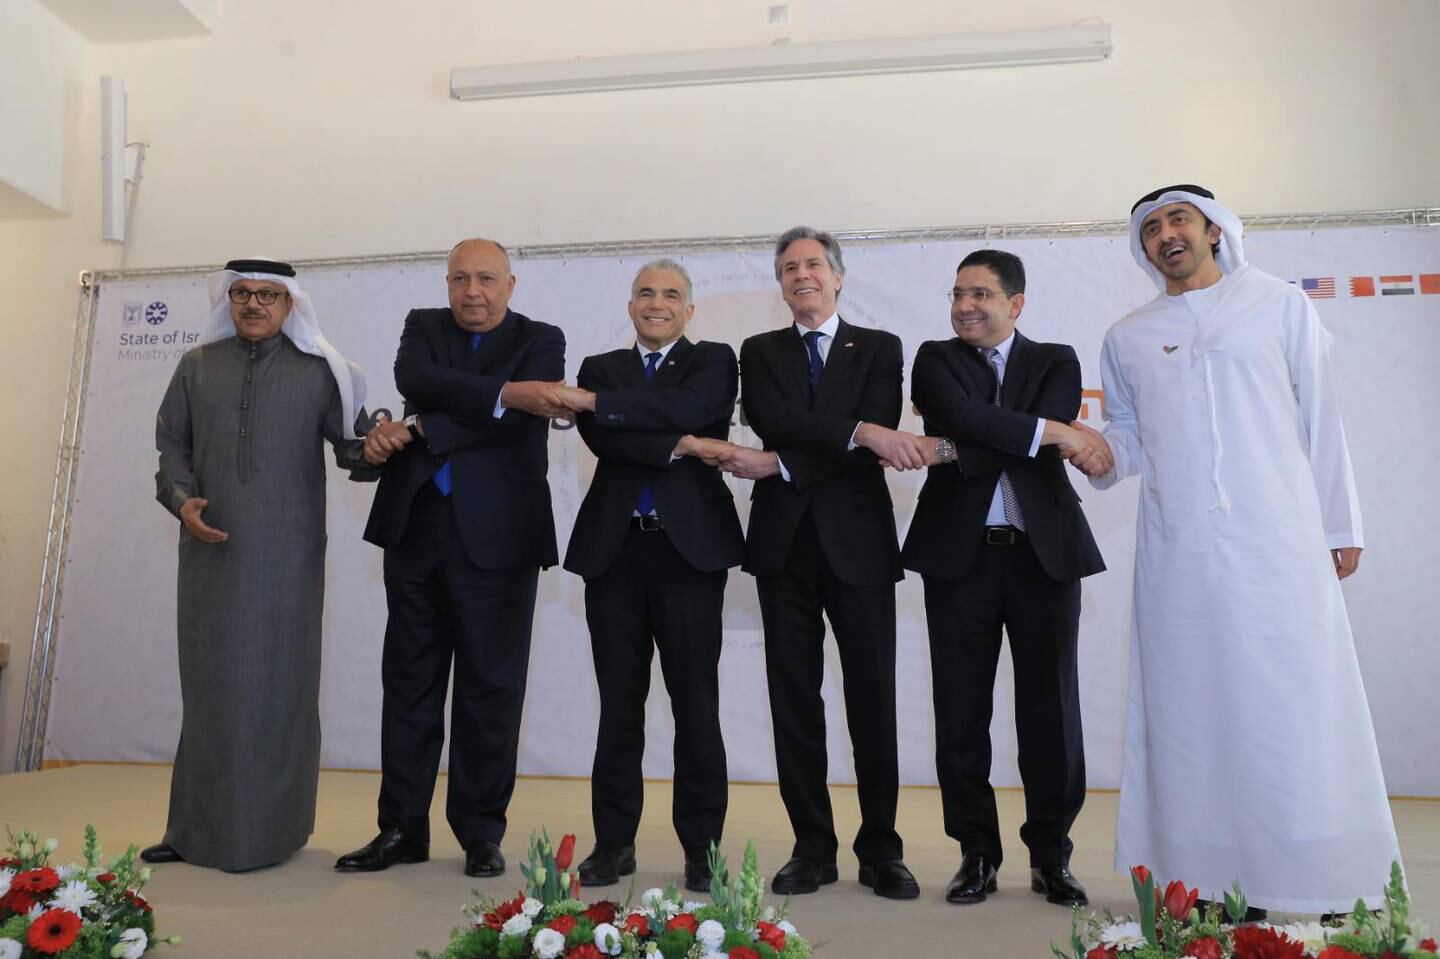 US Secretary of State Antony Blinken, third right, with foreign ministers of Israel, Bahrain, Morocco, Egypt and the UAE during a landmark regional summit hosed by Israel in the southern Negev Desert. EPA